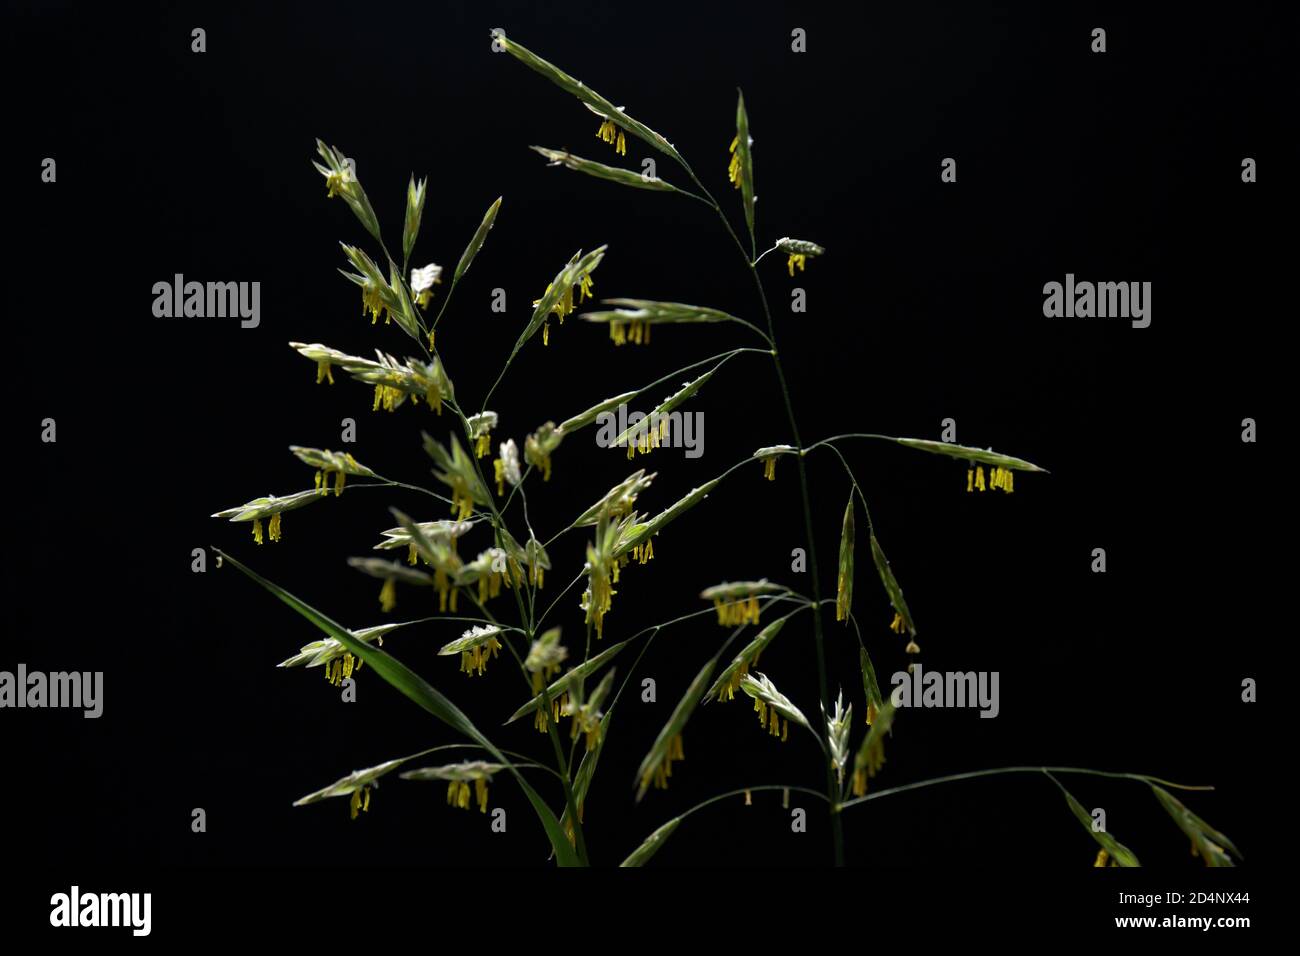 Festuca pratensis. Weed. Flowering grass with seeds on a black background. Selective focus Stock Photo